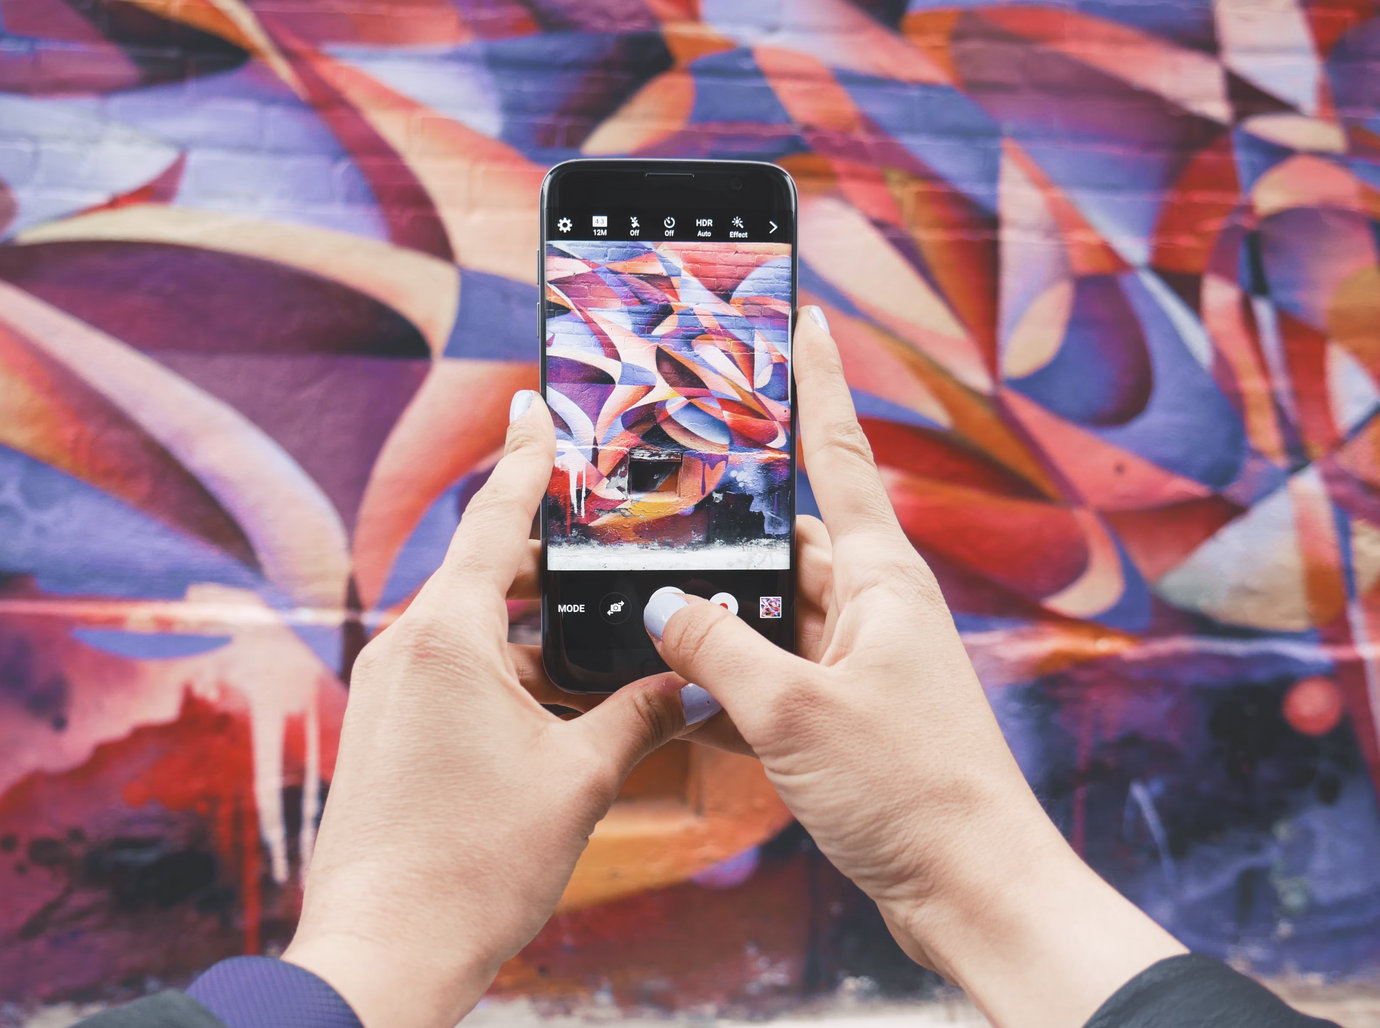 Hands of a person taking a photo of a pink graffiti with their phone